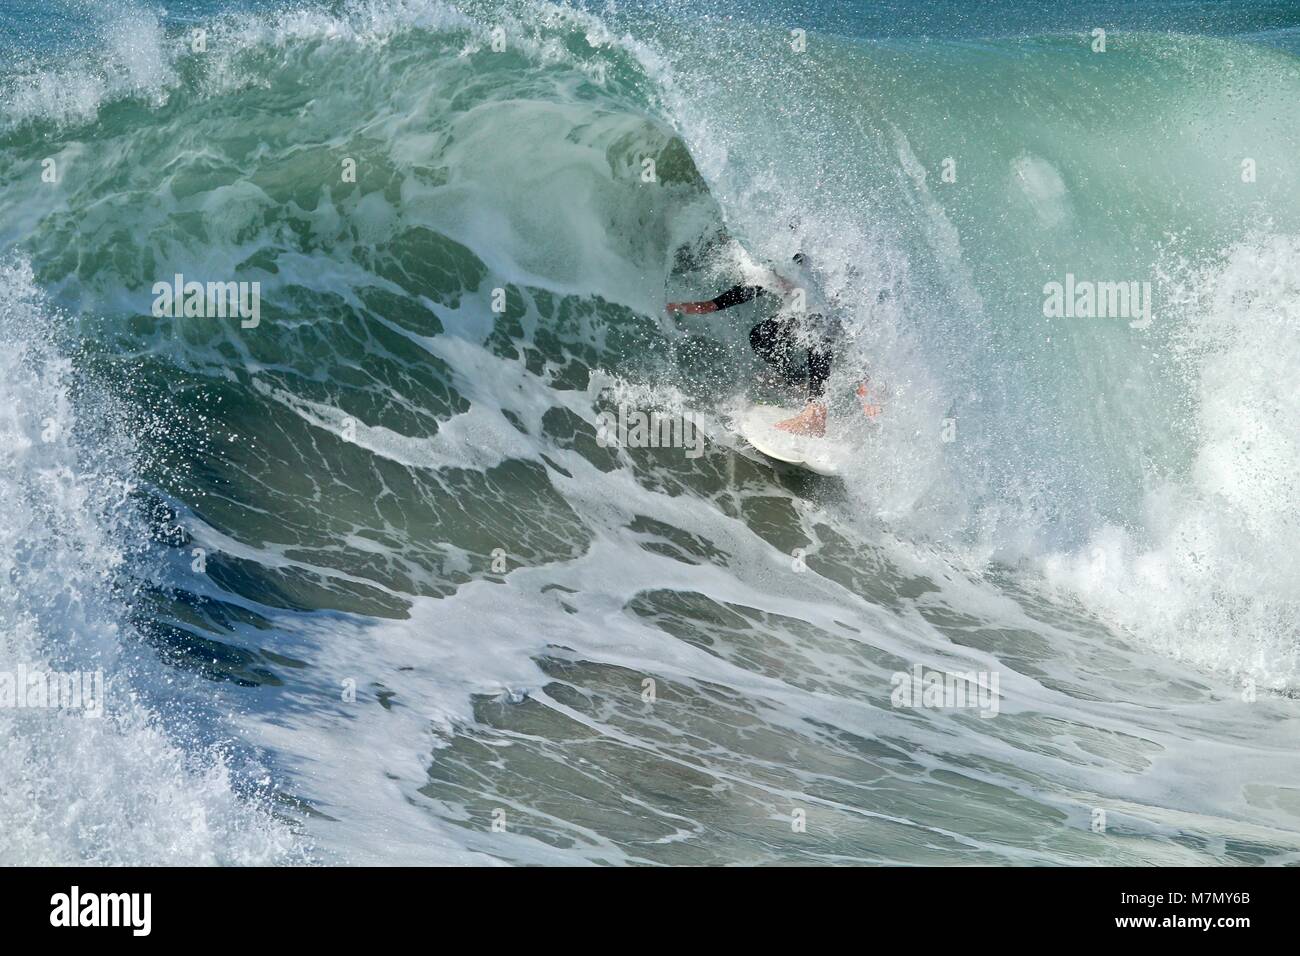 Surfer in the barrel of a wave Stock Photo